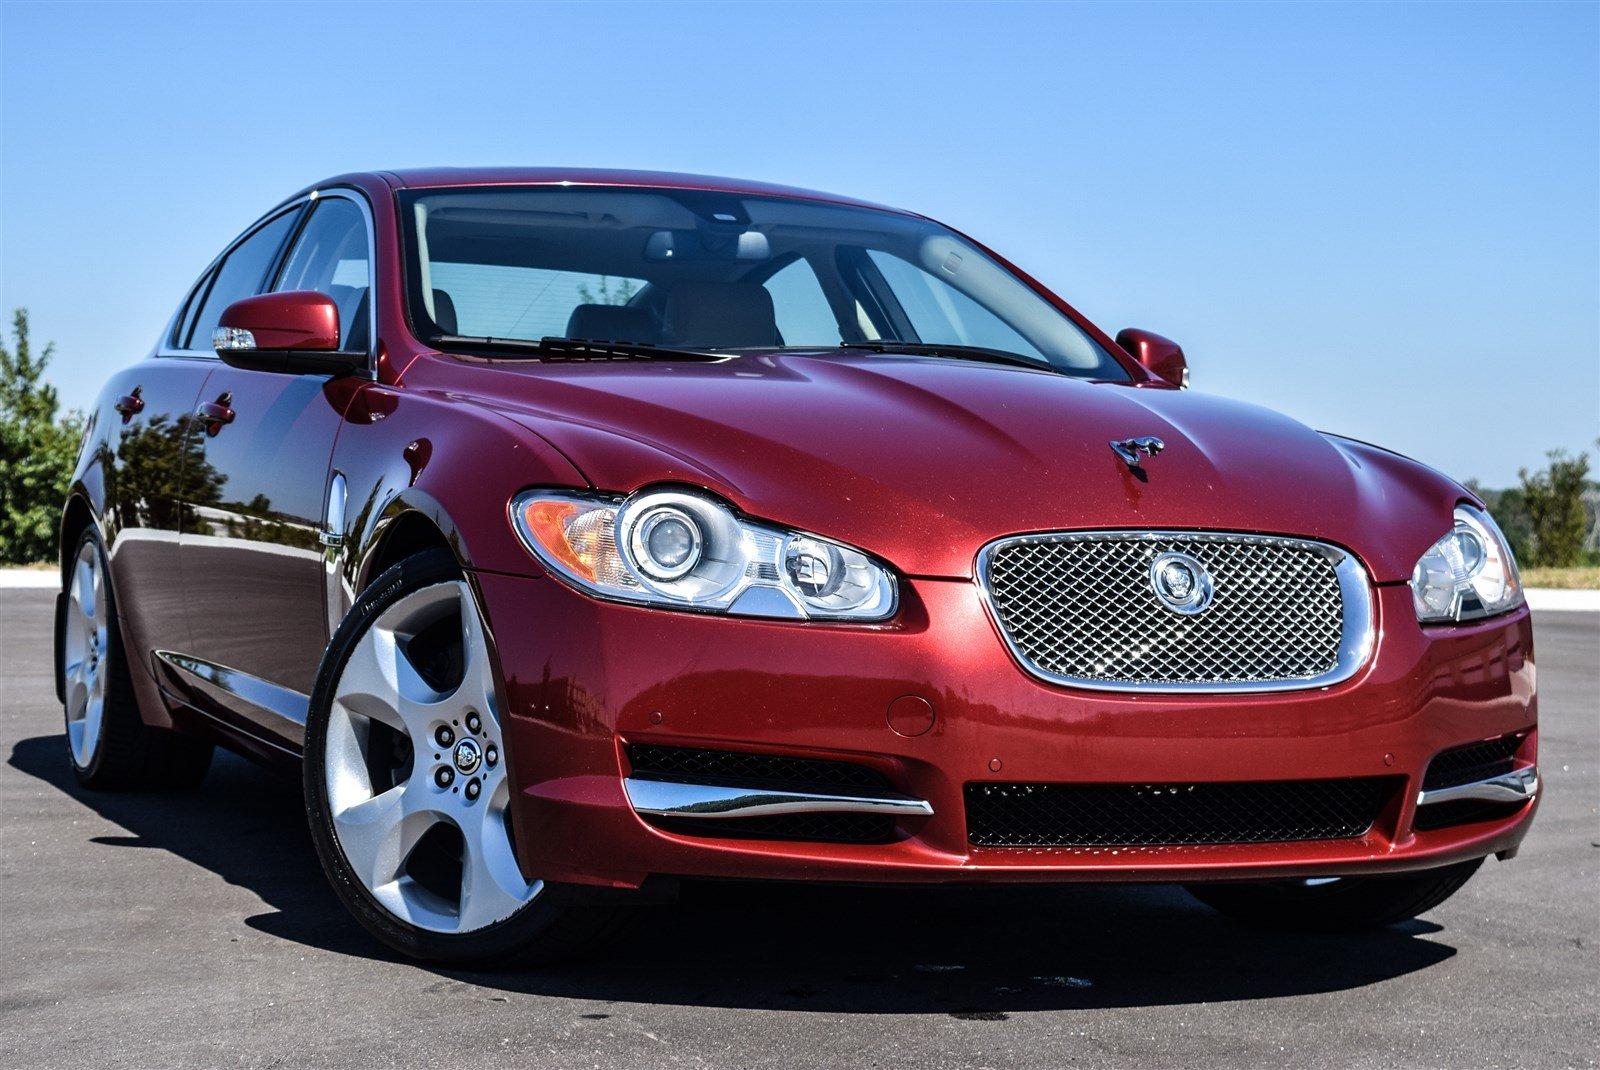 Used 2009 Jaguar XF Supercharged for sale Sold at Gravity Autos Marietta in Marietta GA 30060 3